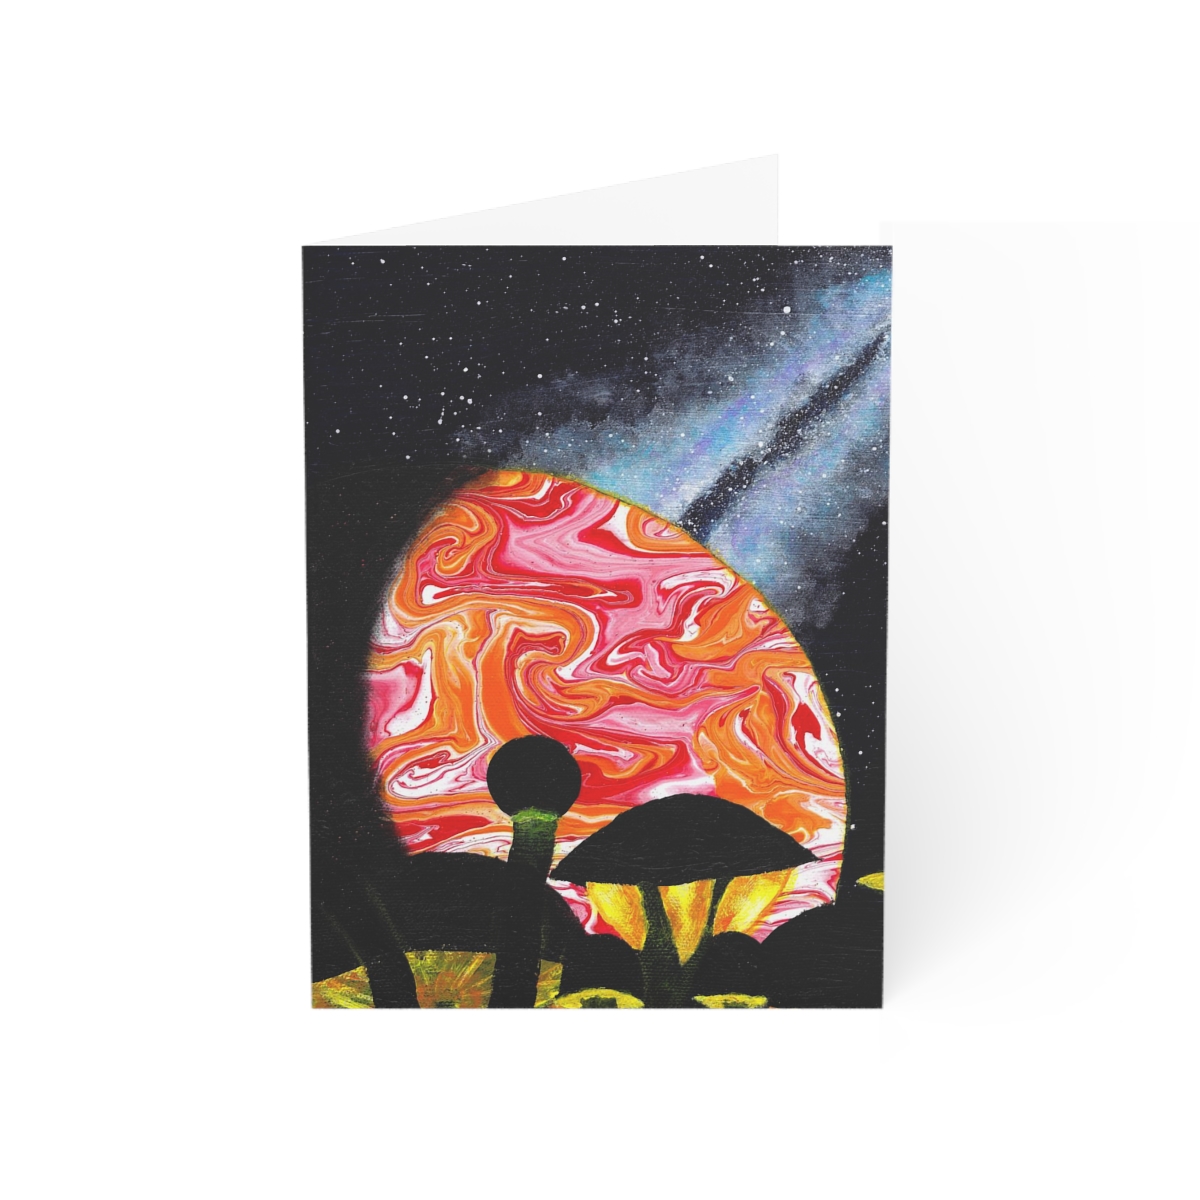 Blank Greeting cards - Planetrise